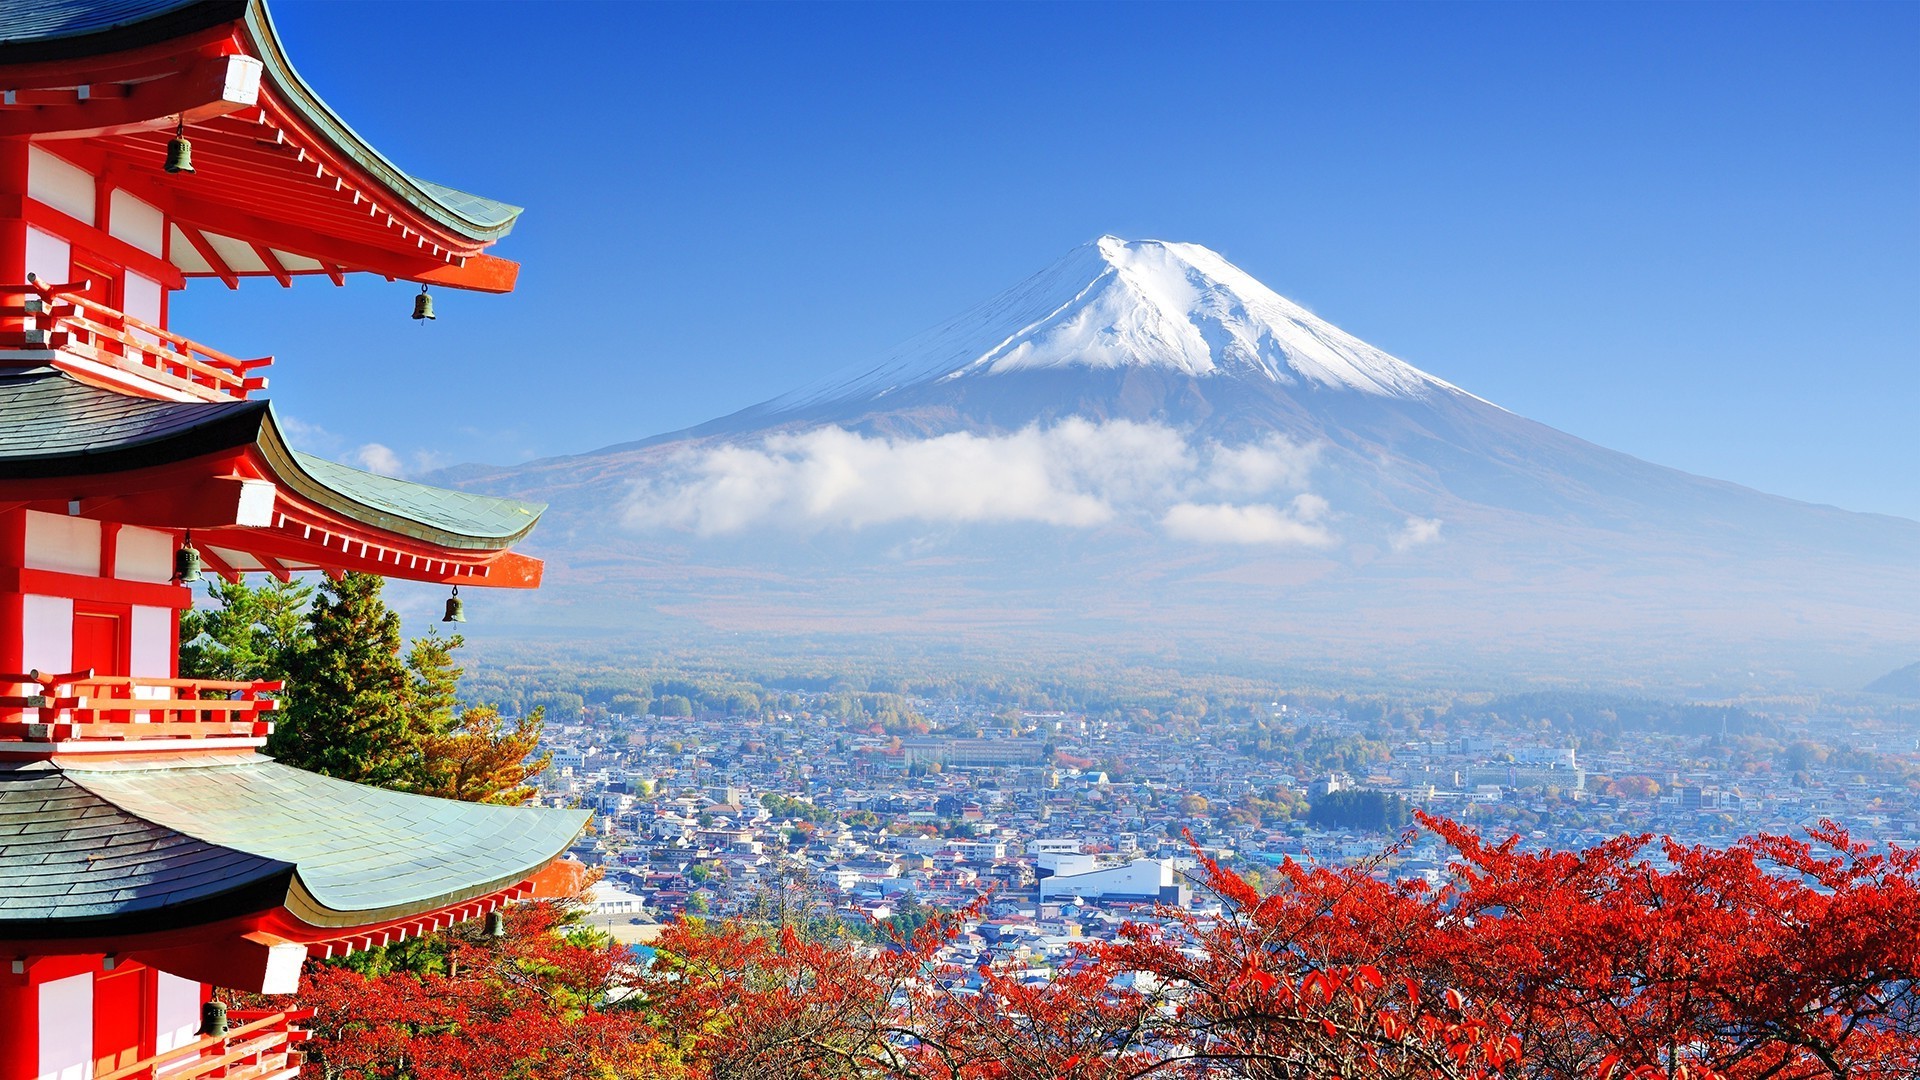 HD Japan Wallpaper and image collection for Desktop & Mobile. Free wallpaper download